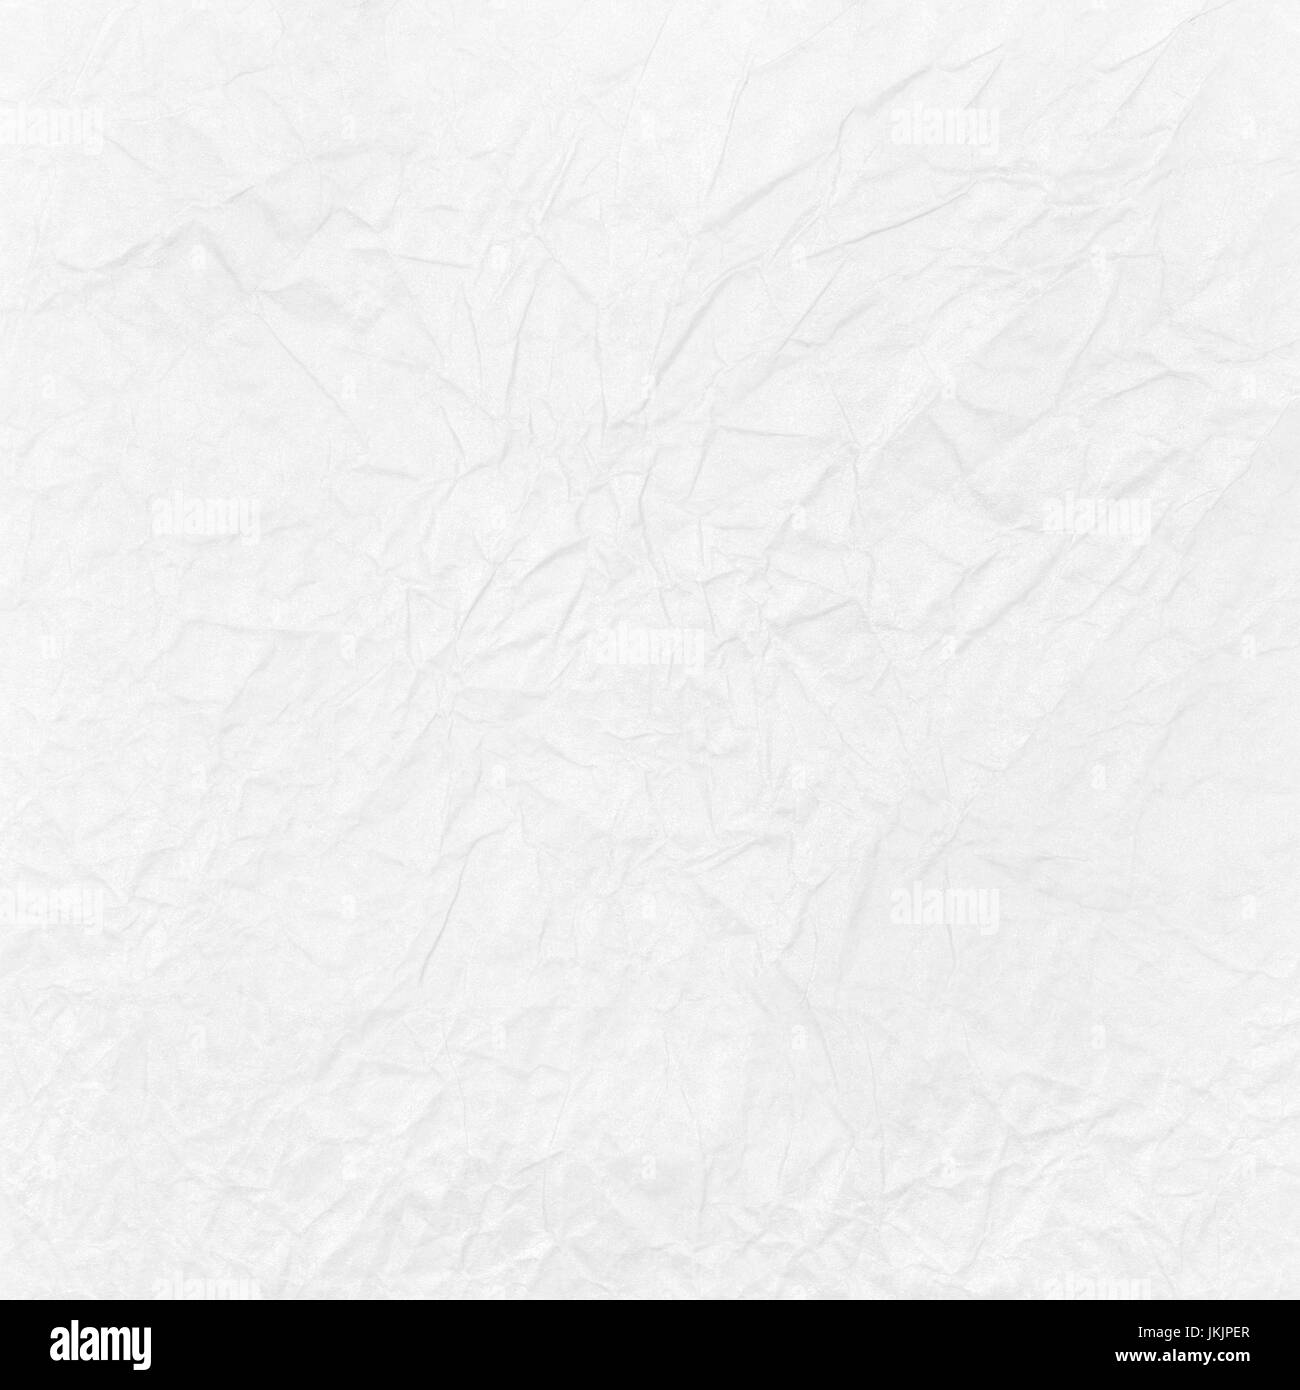 White Wrinkled Paper Texture Stock Photo Alamy